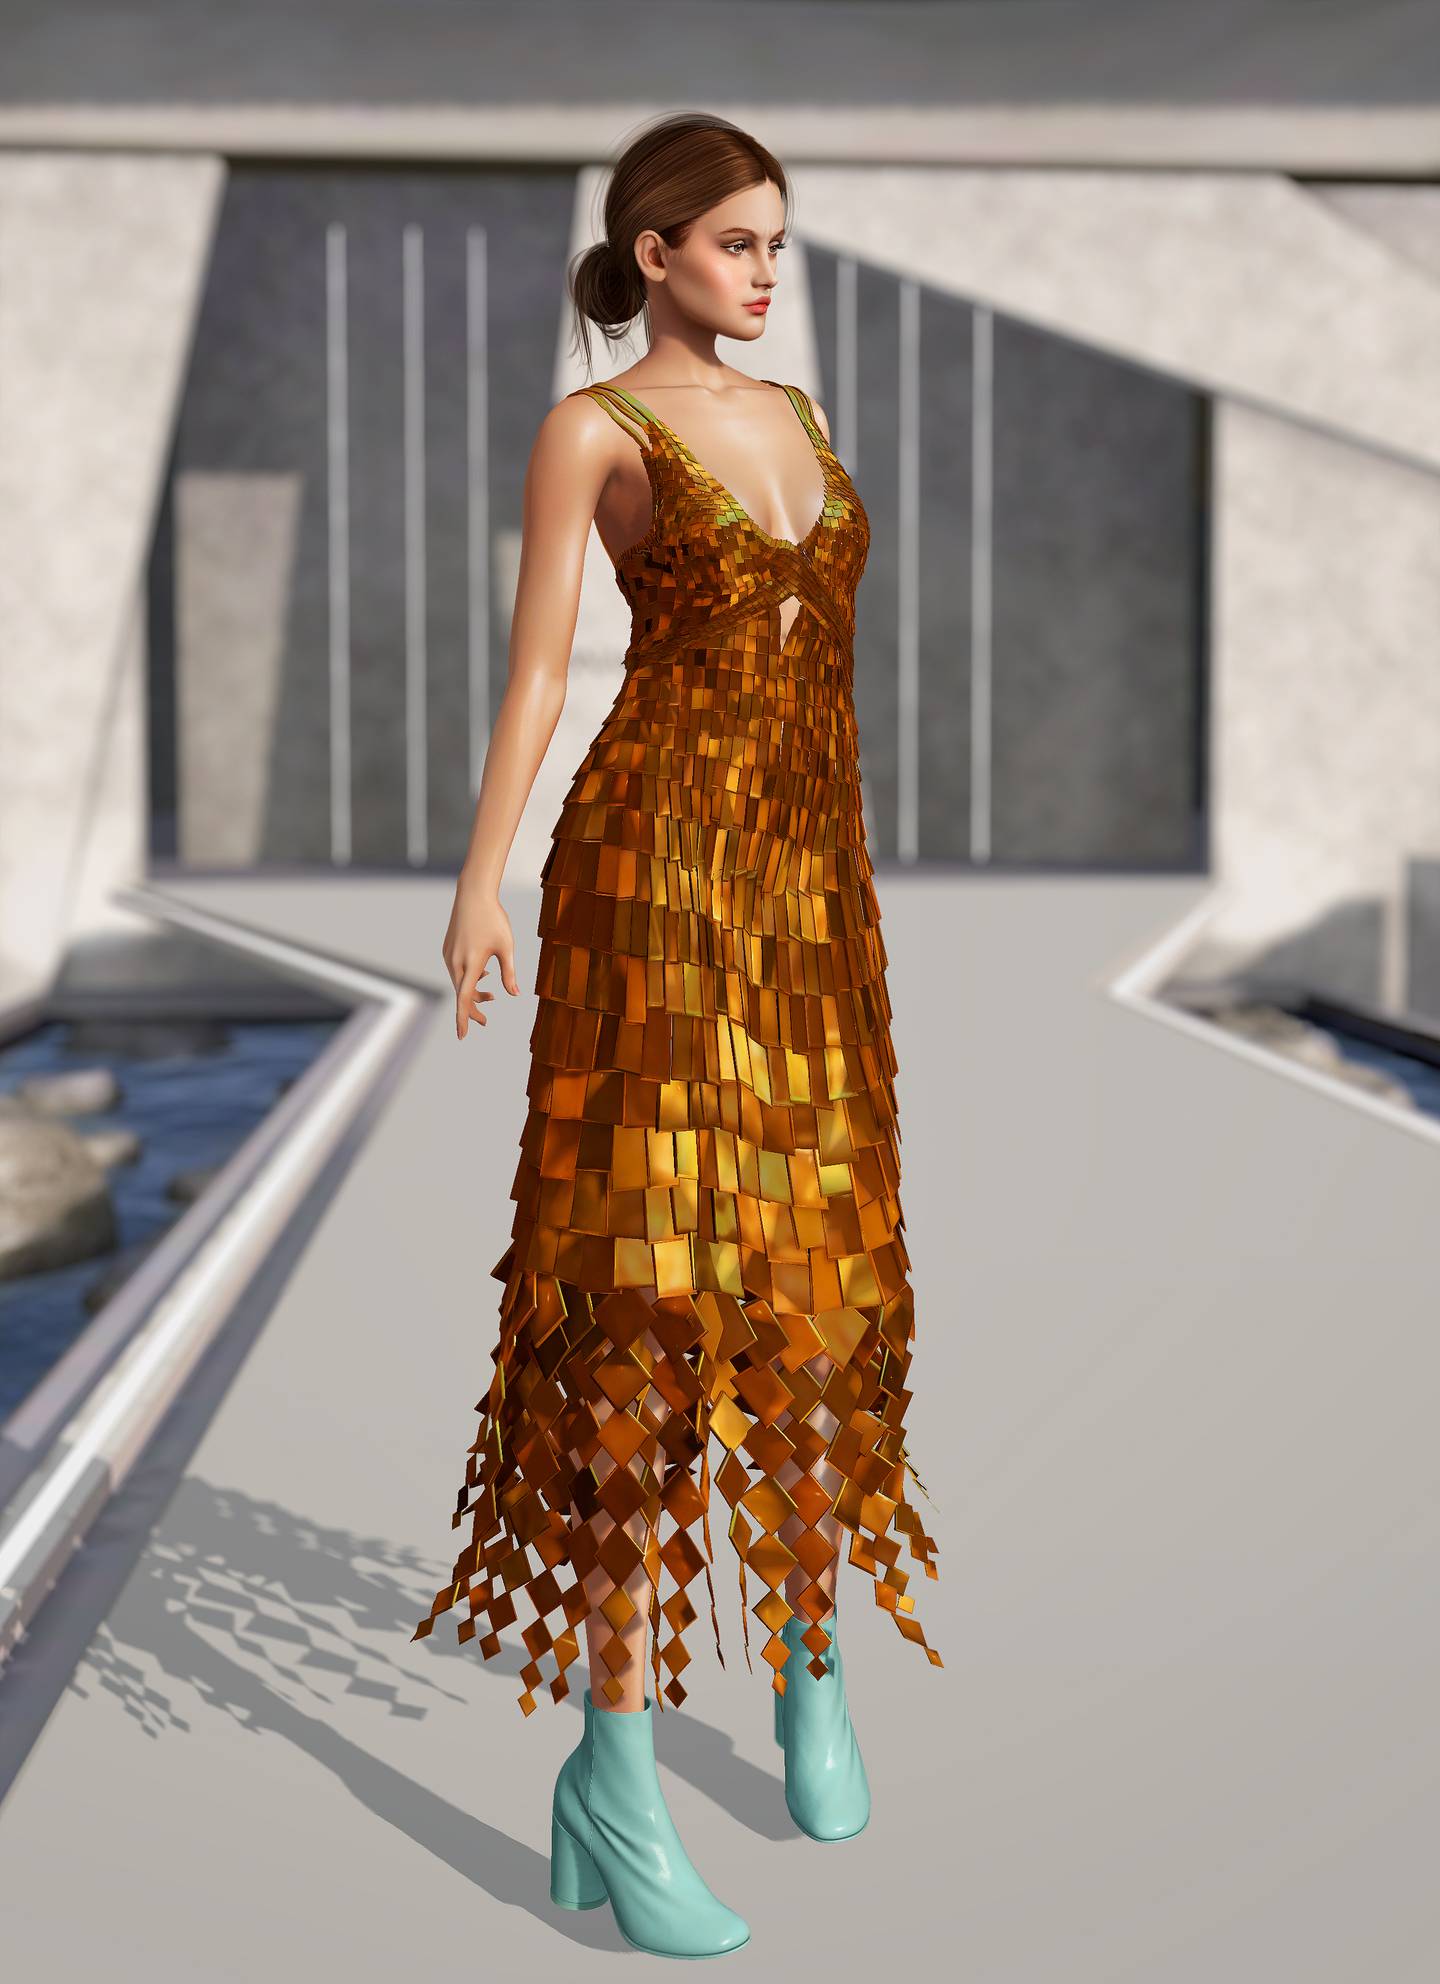 A virtual model wears a dress made of small overlapping gold shingles that transition into a fringe-like hem.